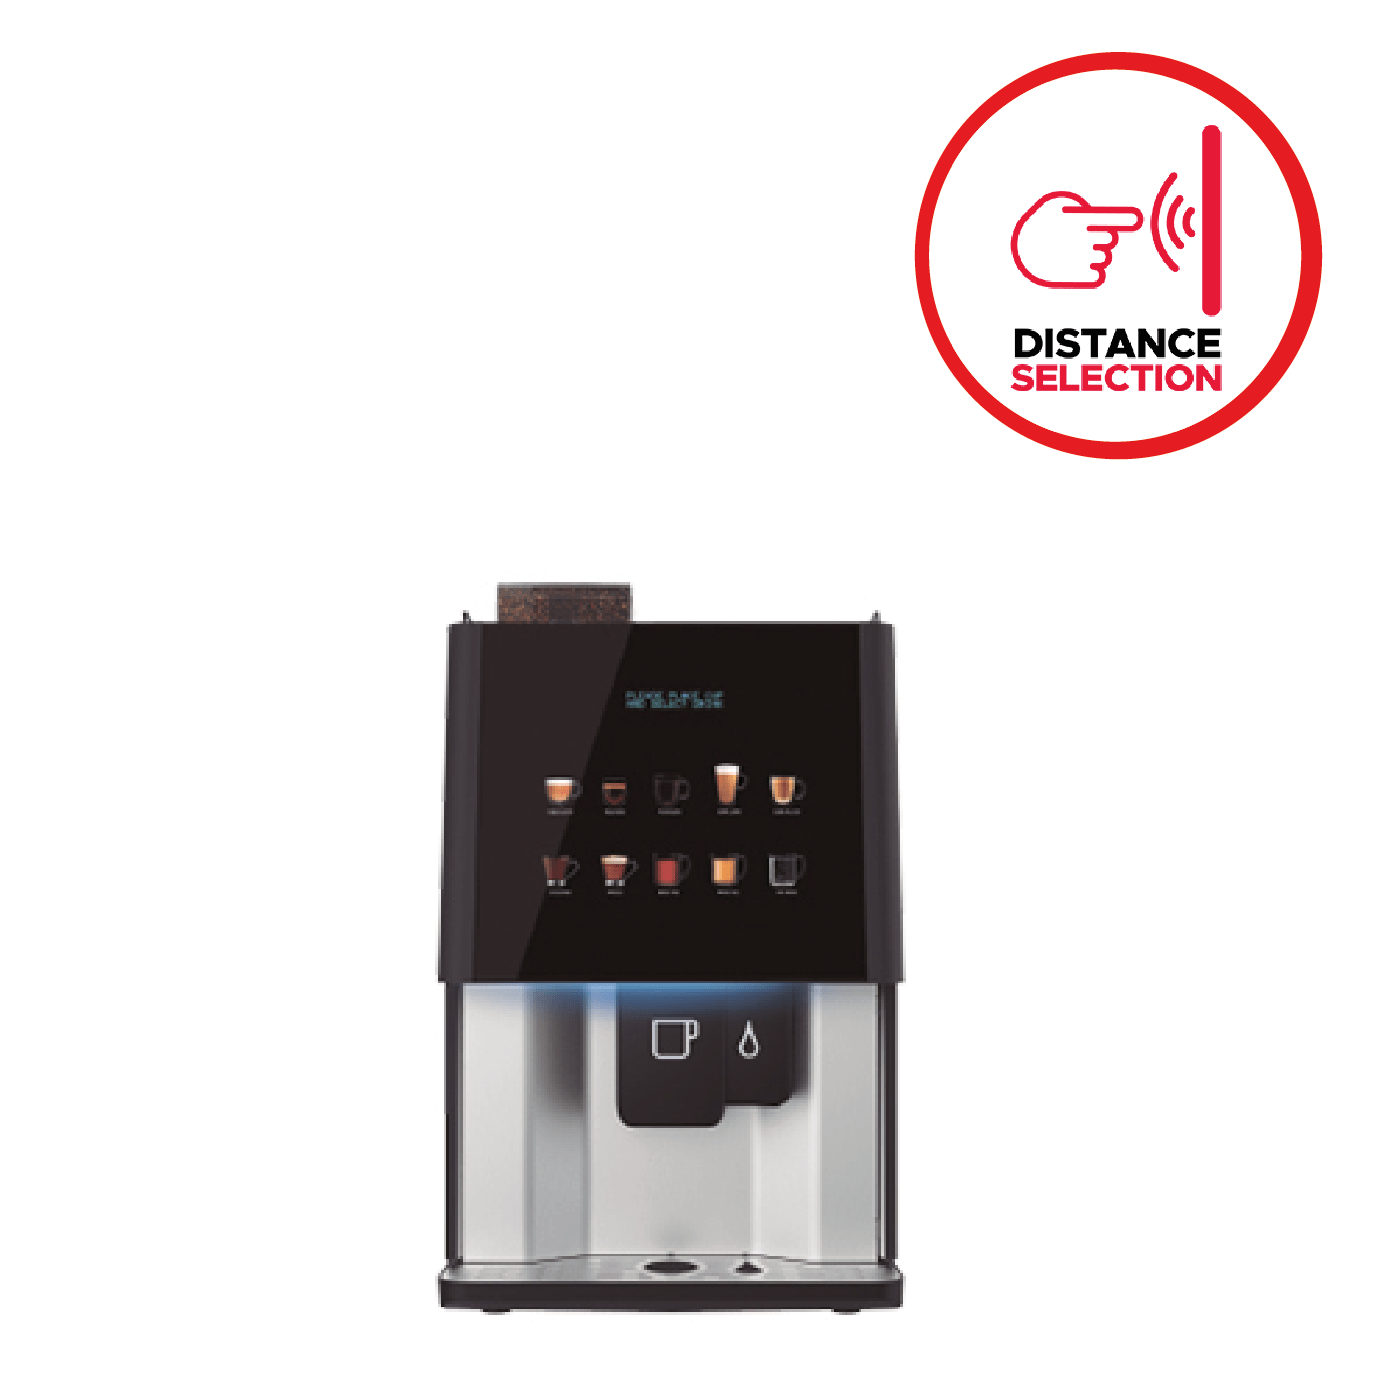 Vitro S Range with Patented Distance Selection Technology by Coffeetek